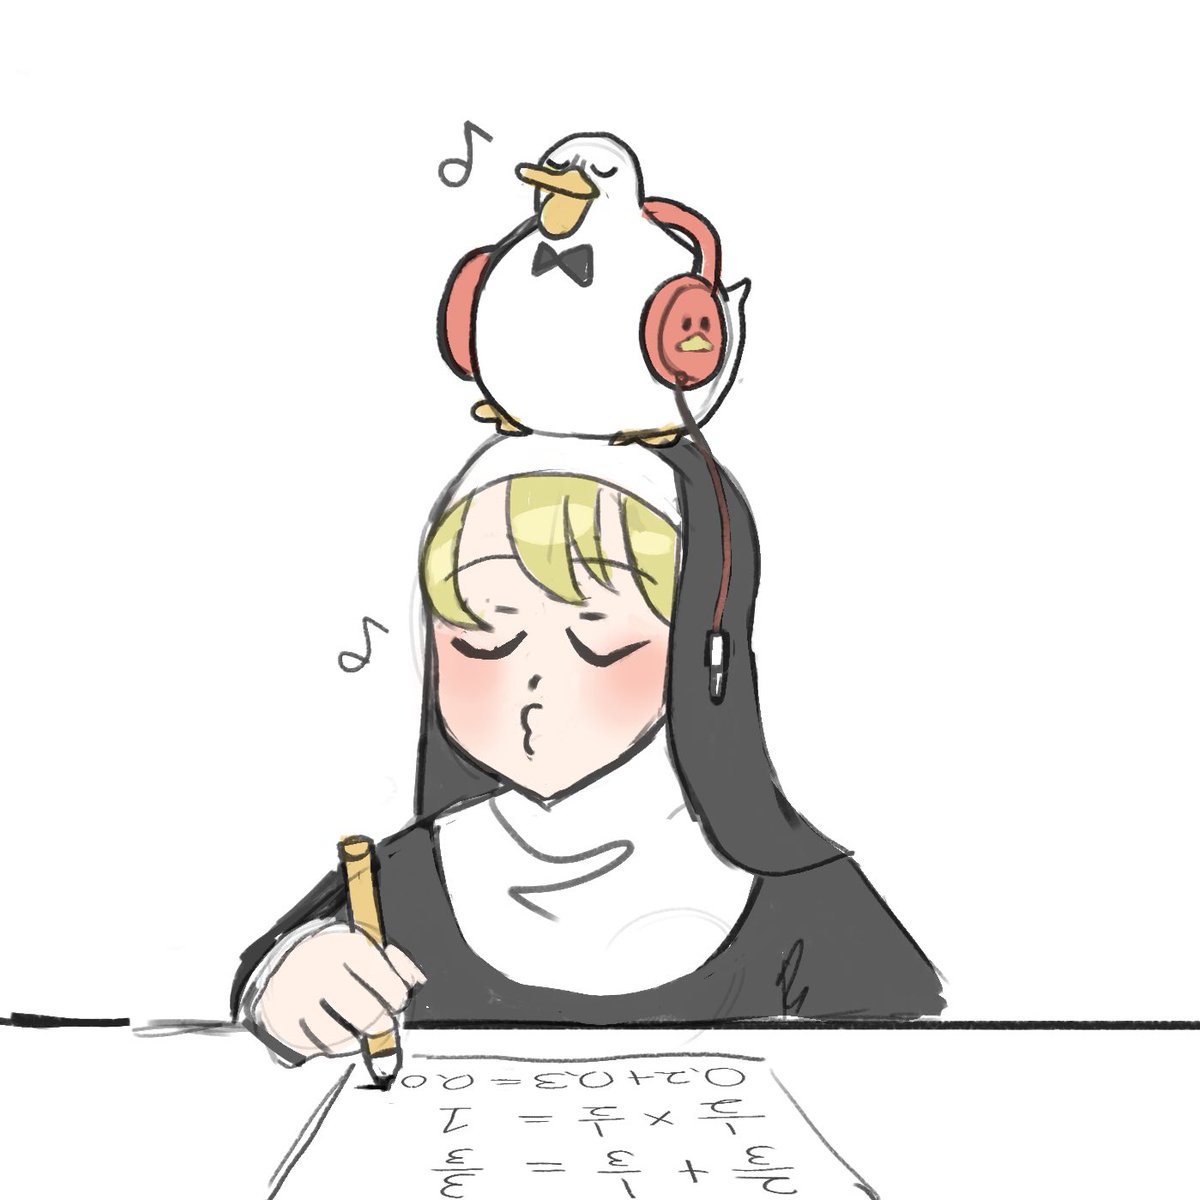 I'm looking for music that matches the atmosphere of Little Nuns. I'll listen to them while drawing it. 